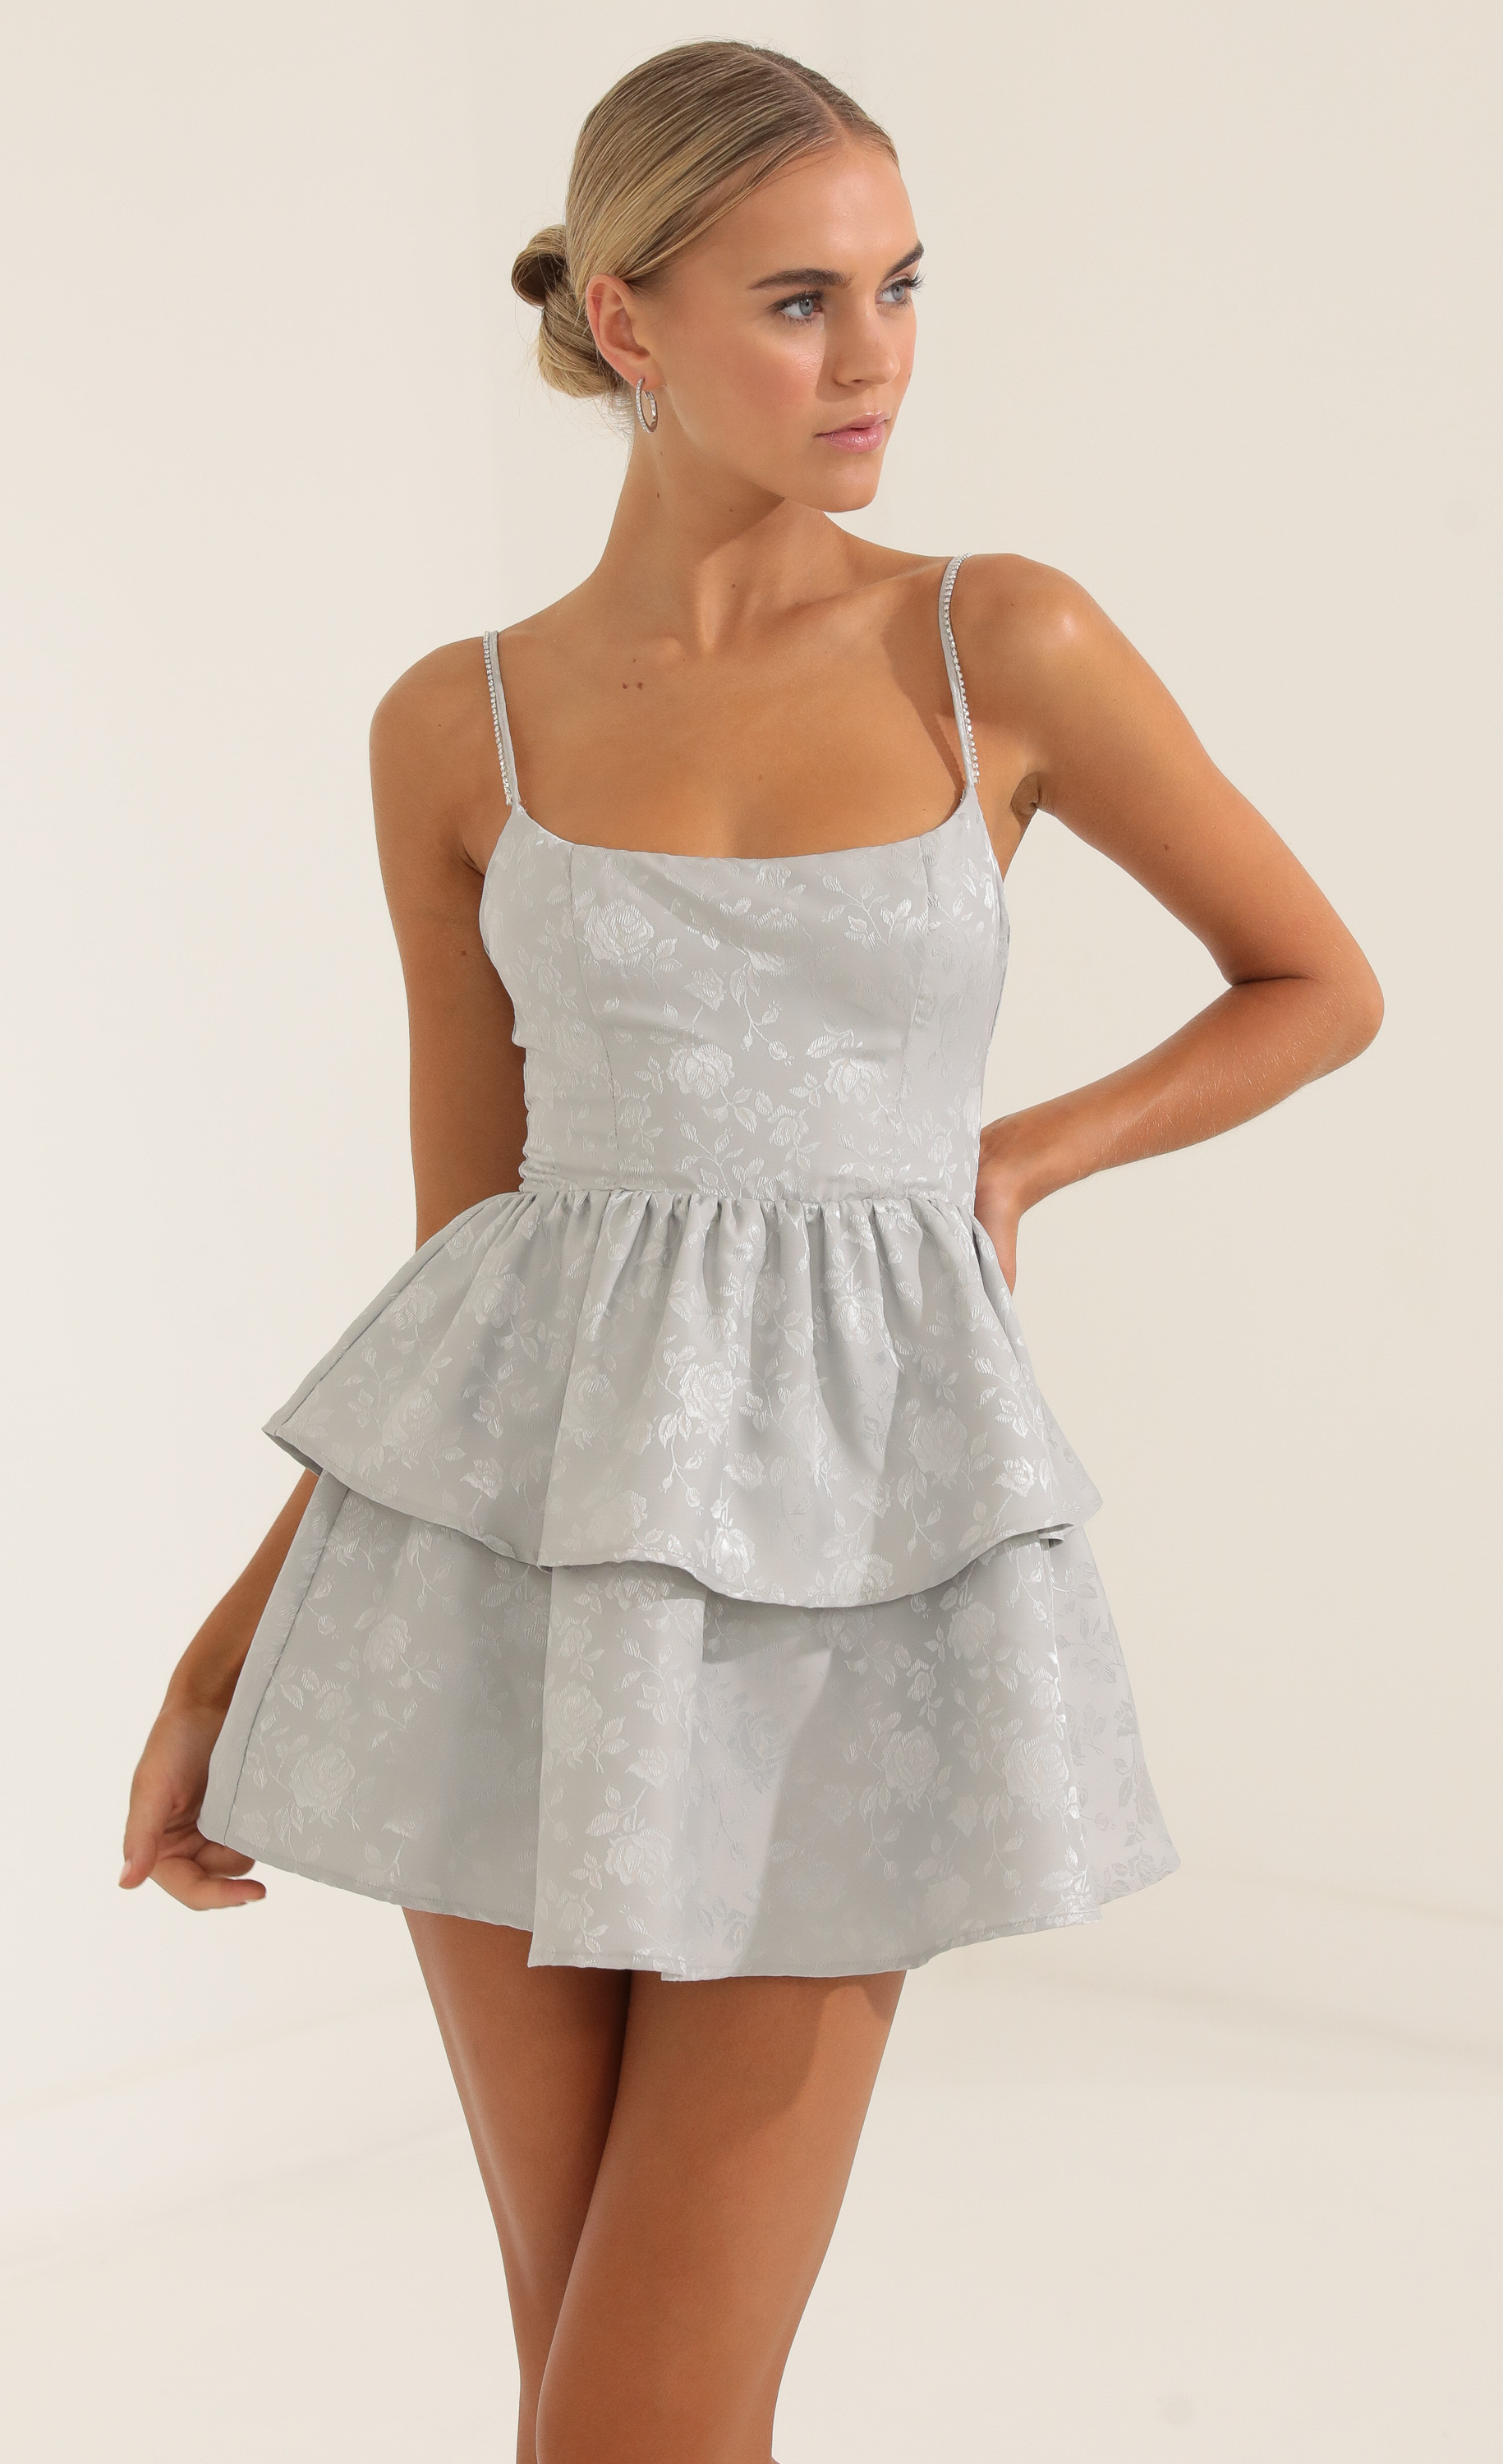 Suzanne Floral Jacquard Ruffle Dress in Grey